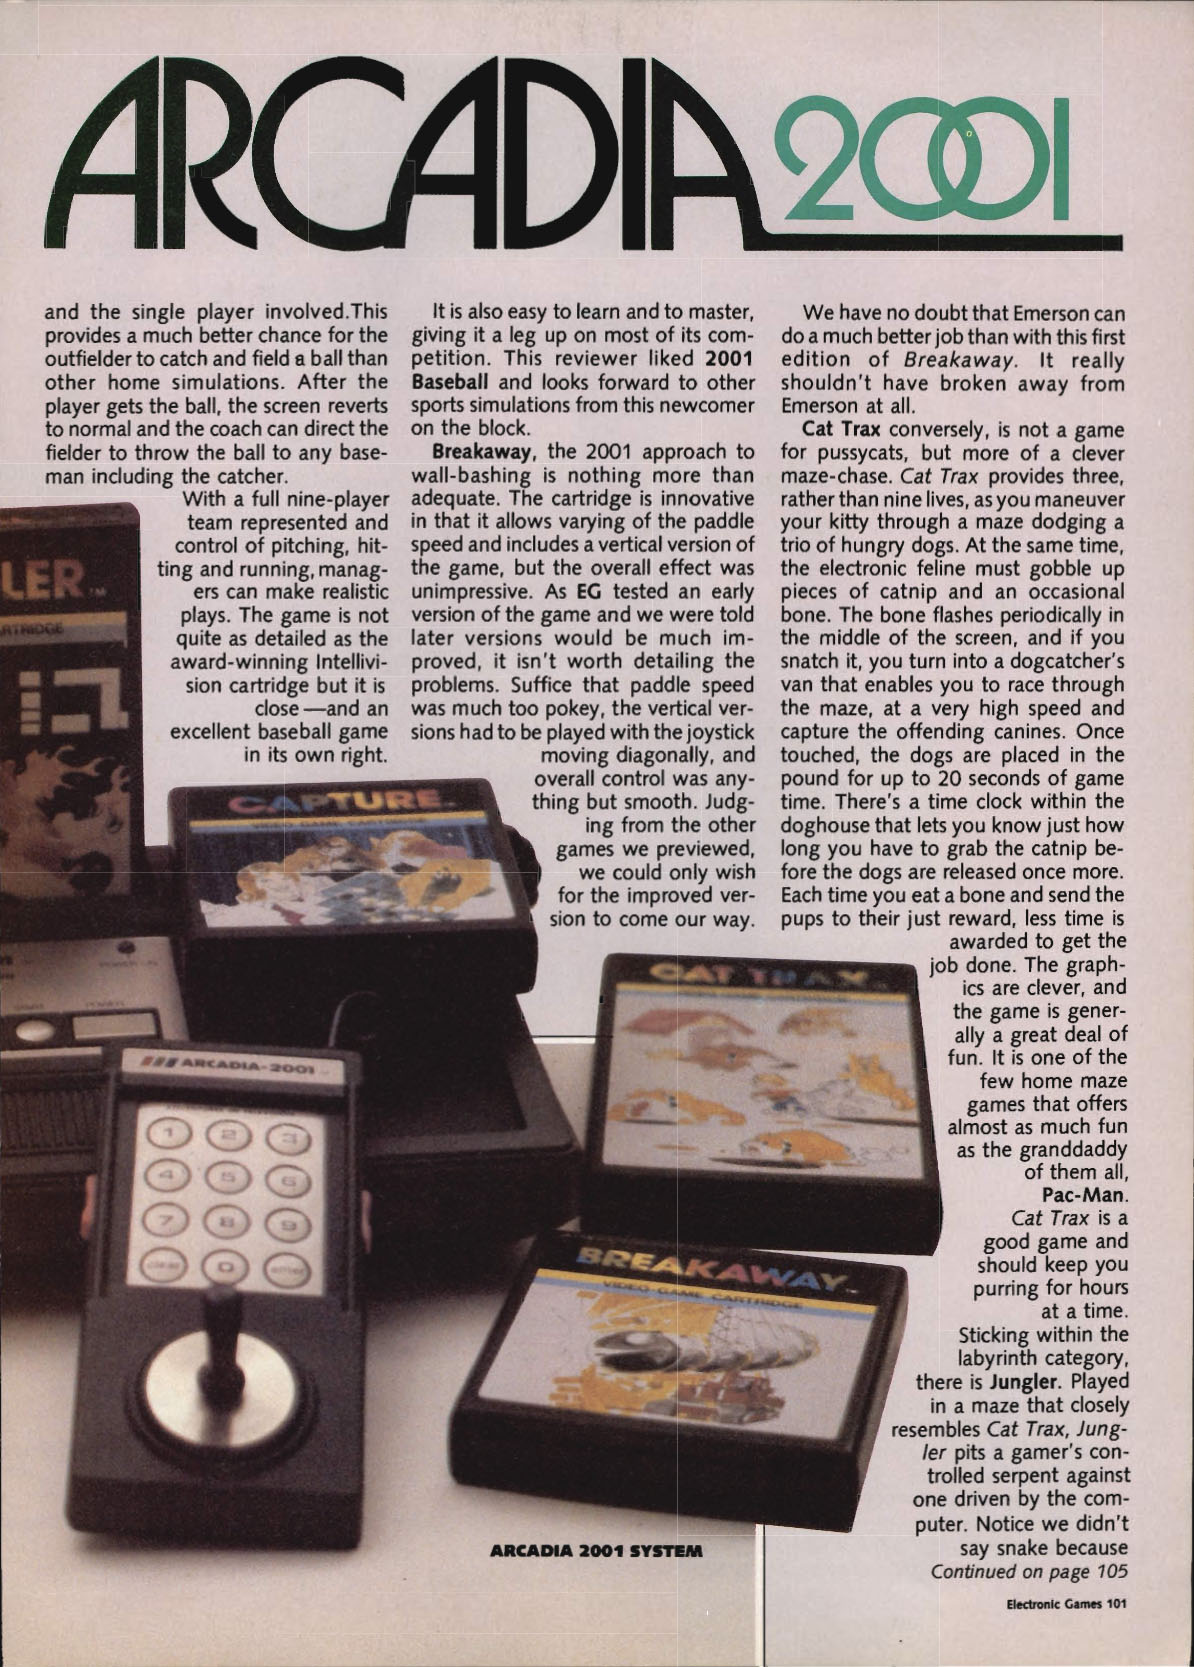 Emerson Arcadia 2001 - A Gamer's Evaluation, Electronic Games November 1982 page 101